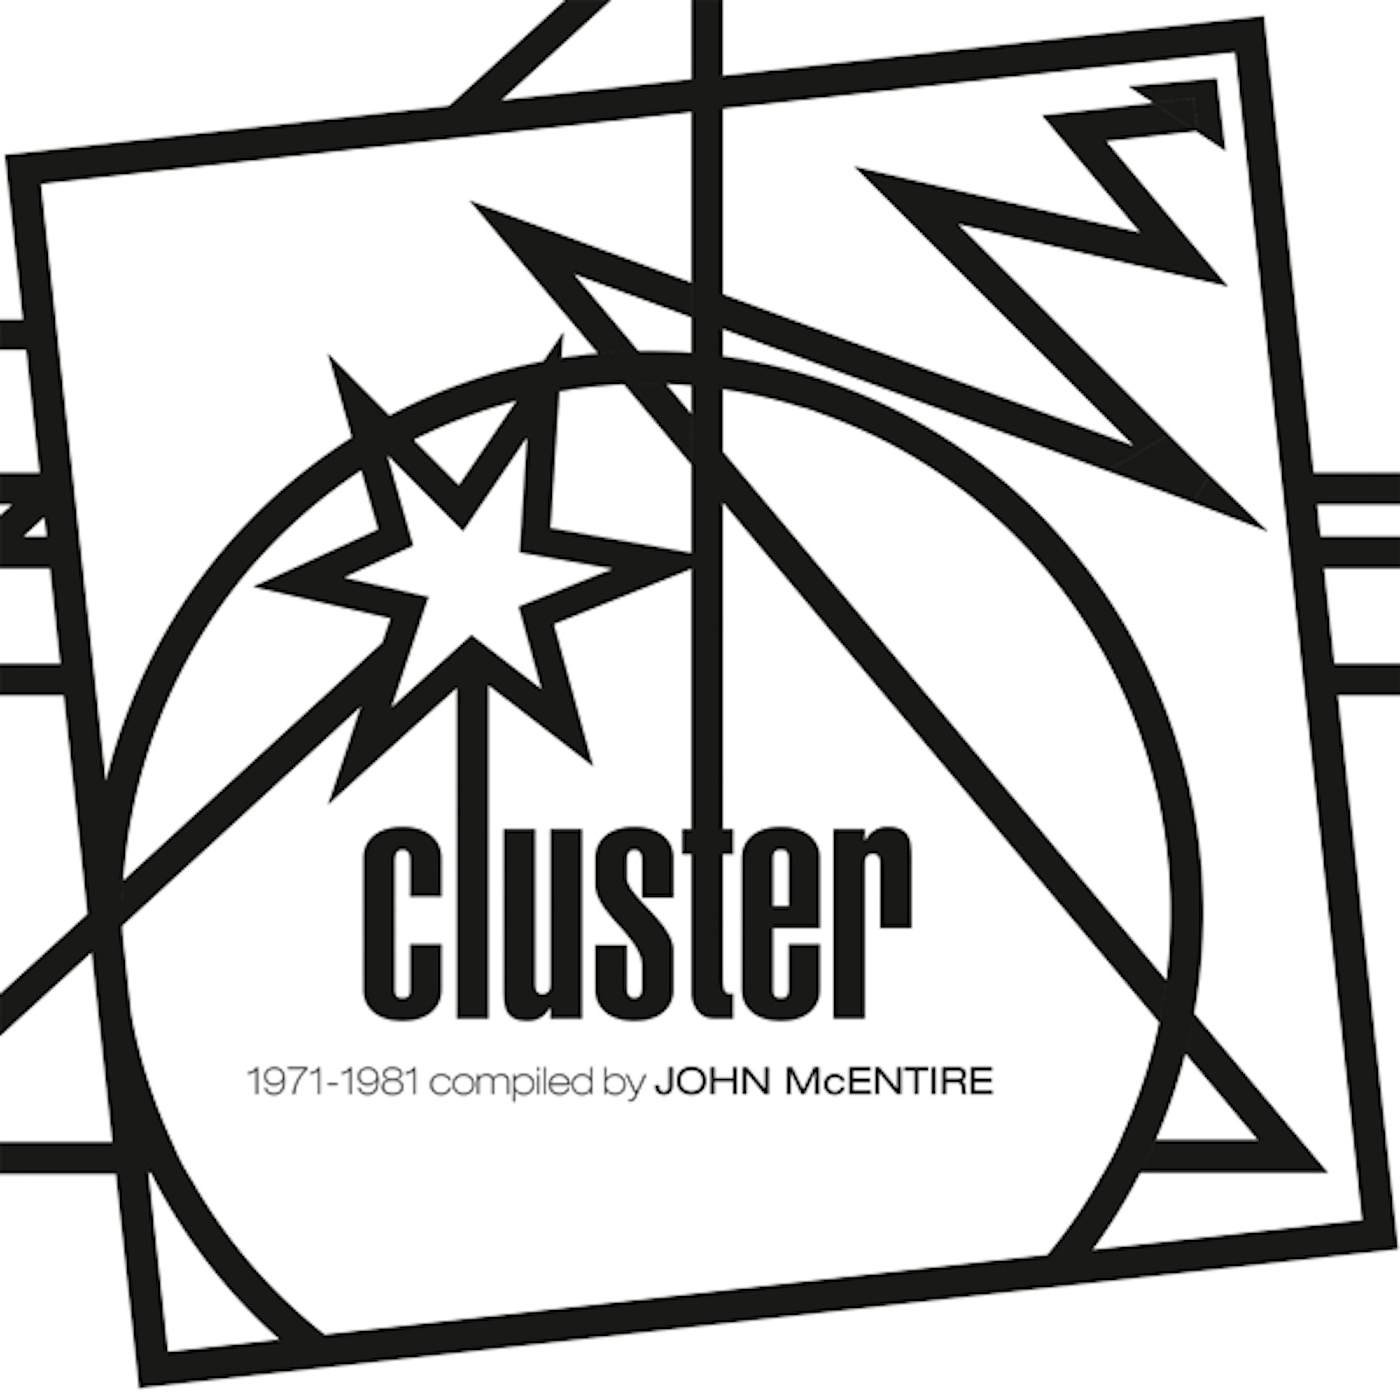 KOLLEKTION 06: CLUSTER (1971-1981) COMPILED AND ASSEMBLED BY JOHN MCENTIRE Vinyl Record